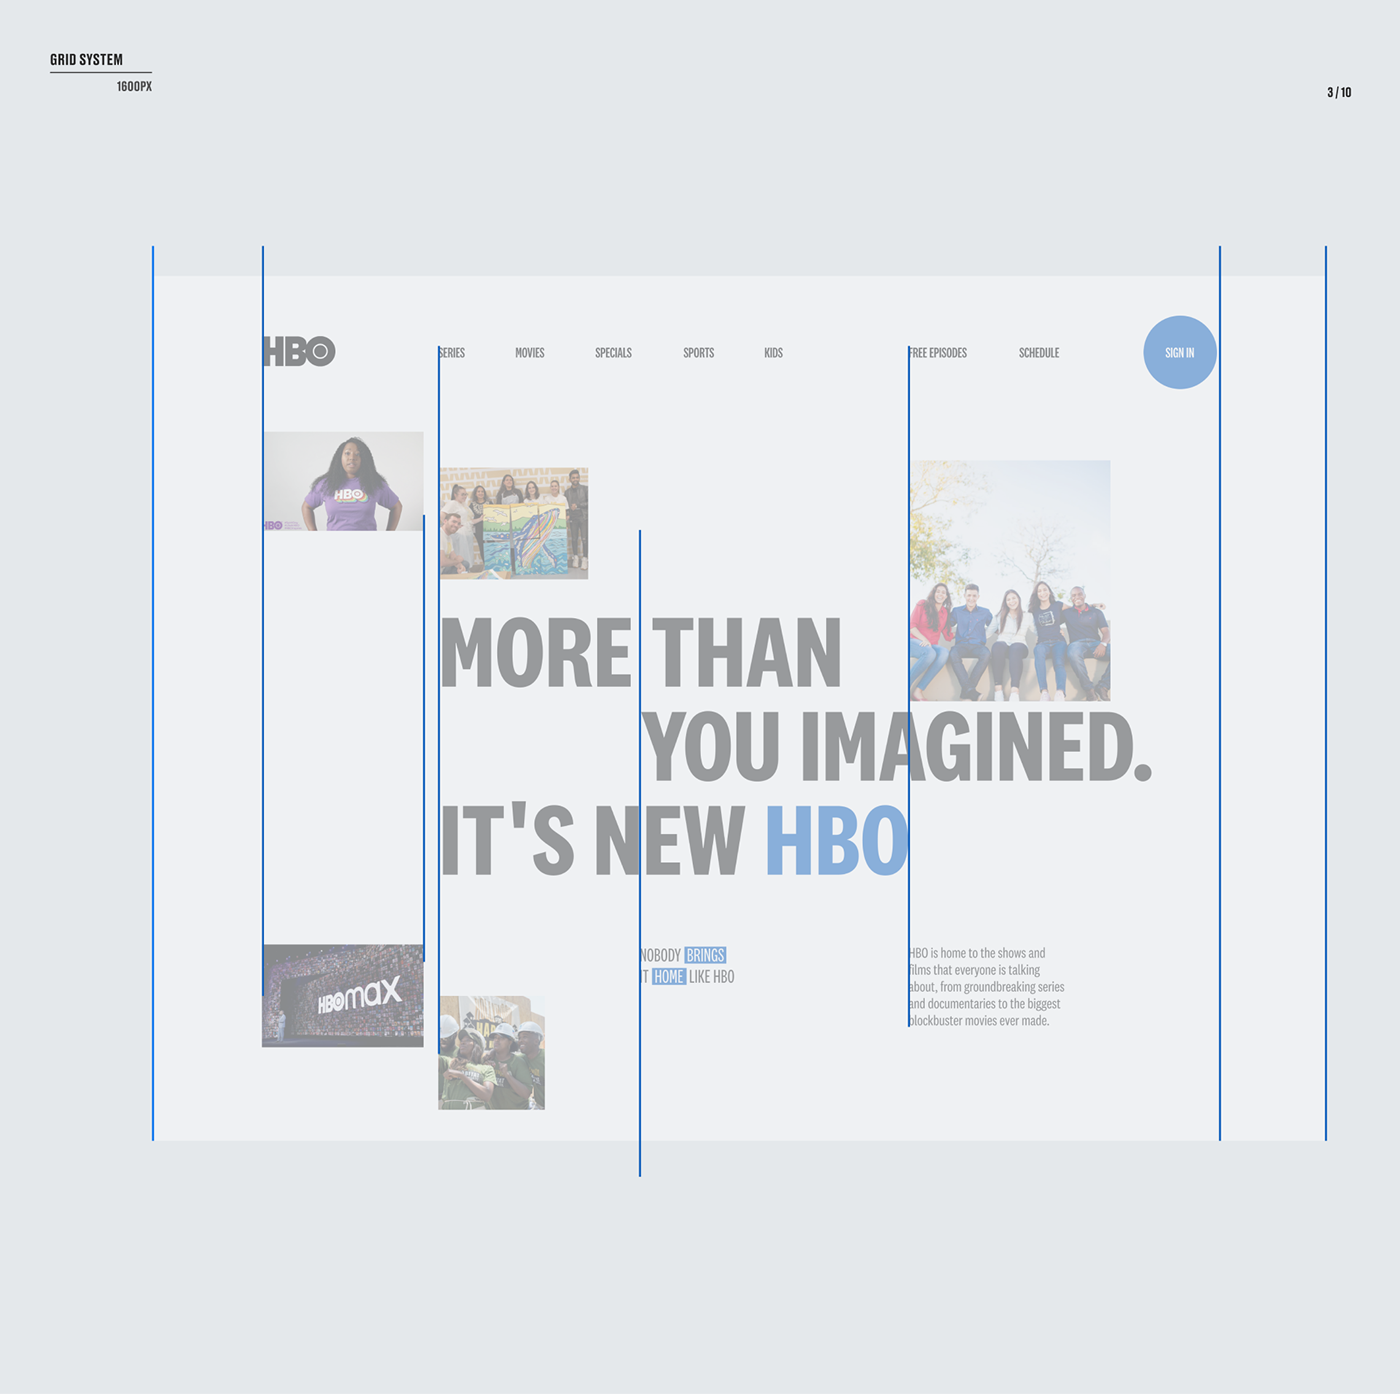 Channel corporate hbo Movies news redesign UI ux Webdesign Website